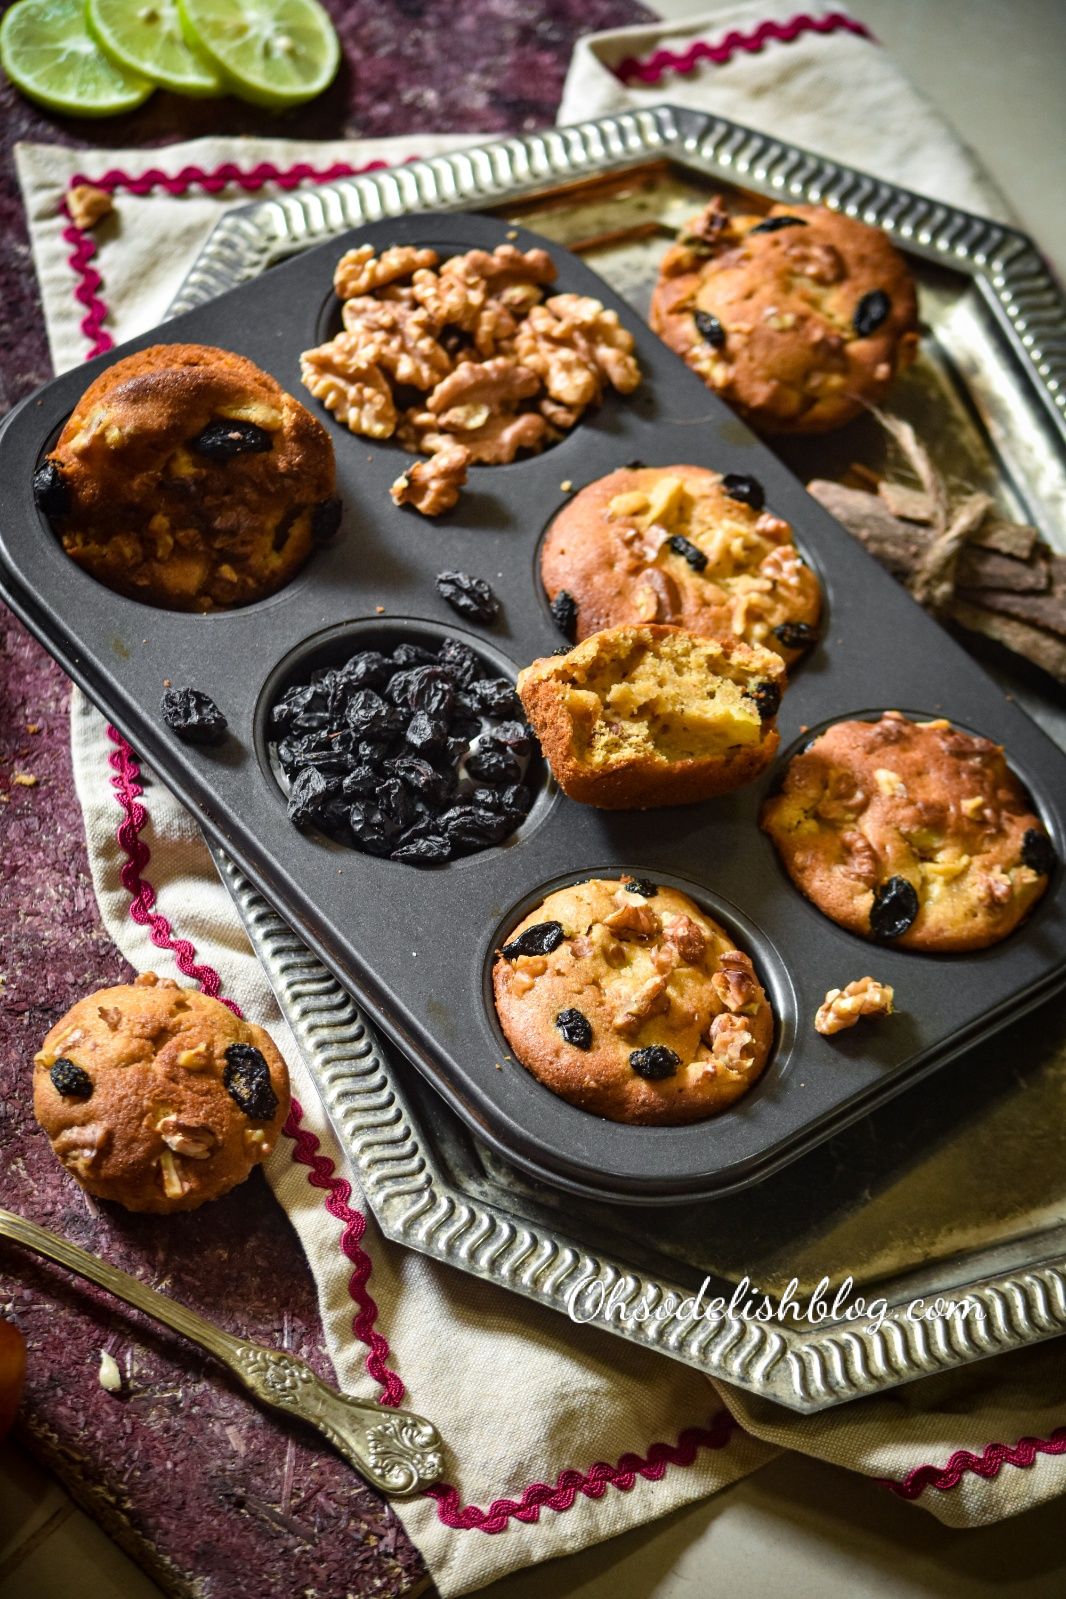 Healthy apple raisin walnut muffins made with wheat and amaranth flour 